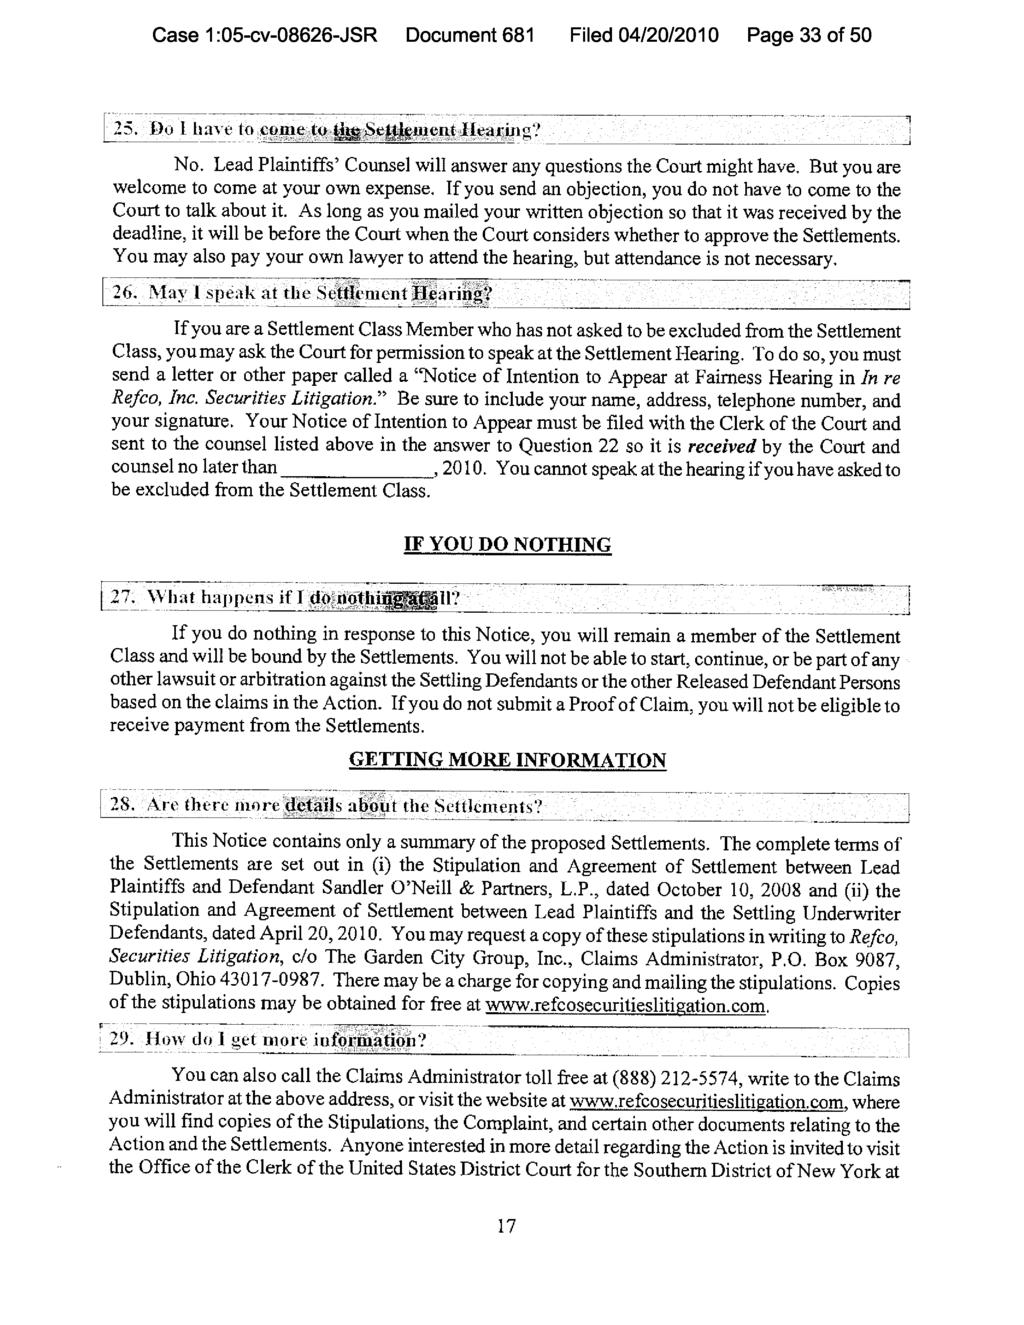 Case 1:05-cv-08626-JSR Document 681 Filed 04/20/2010 Page 33 of 50 No. Lead Plaintiffs' Counsel will answer any questions the Court might have. But you are welcome to come at your own expense.